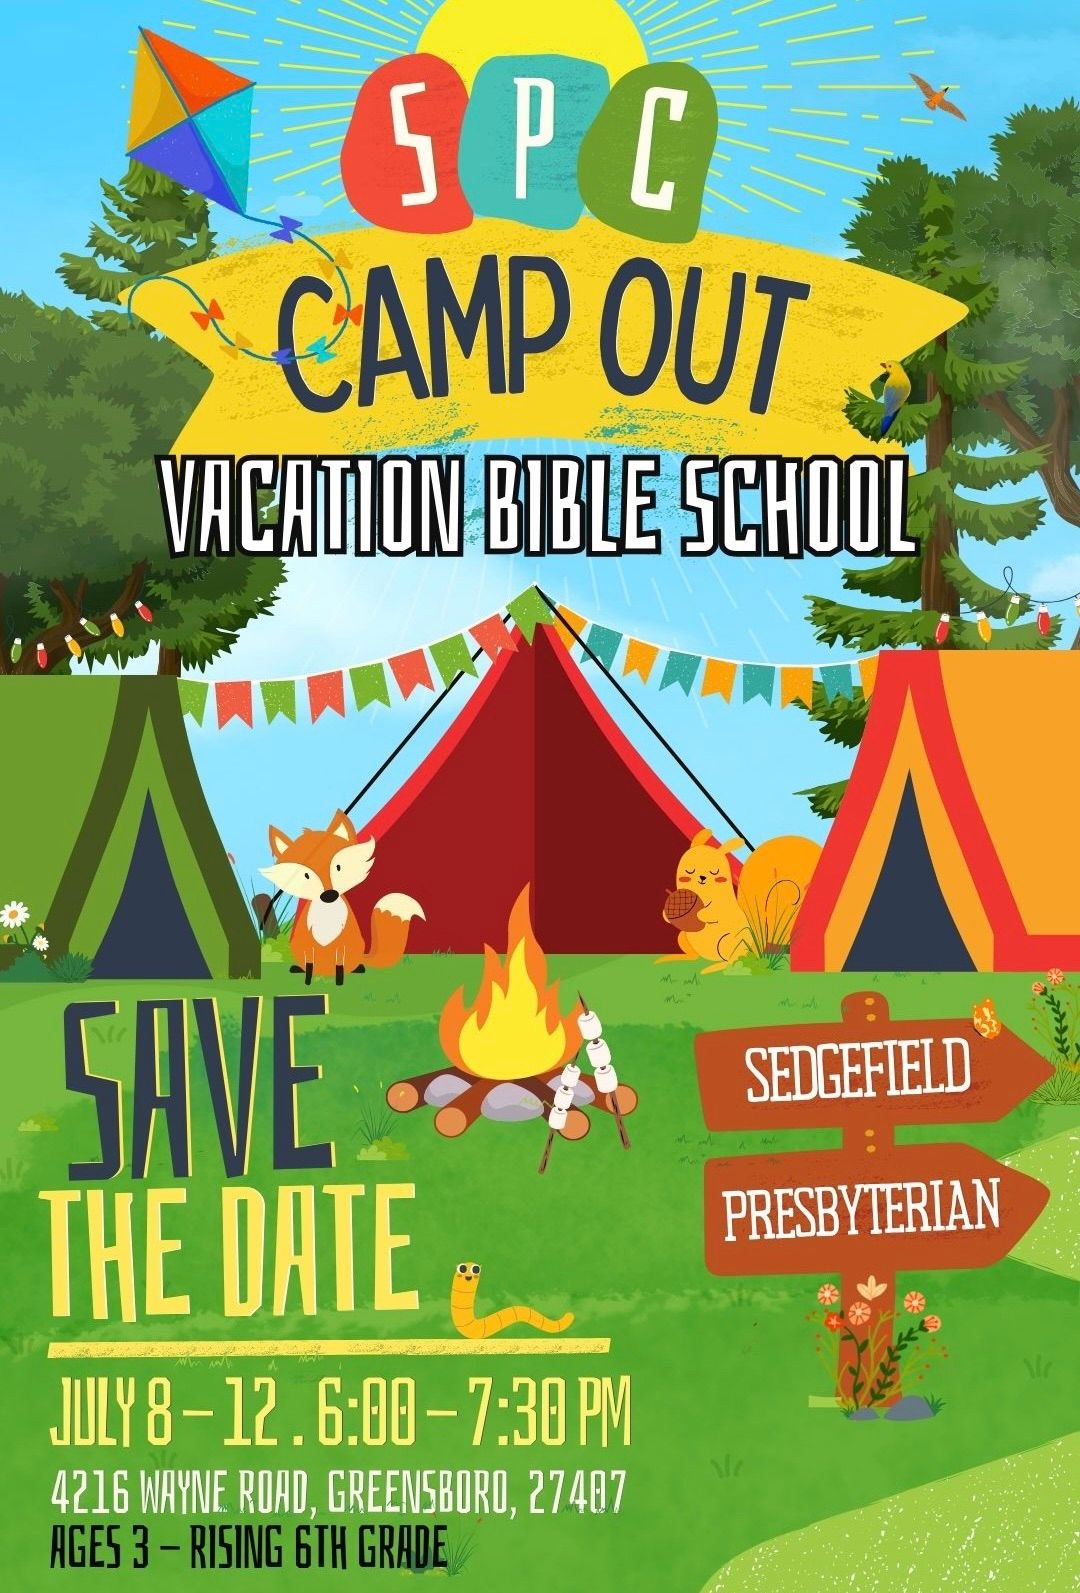 SPC Camp Out Vacation Bible School (free)